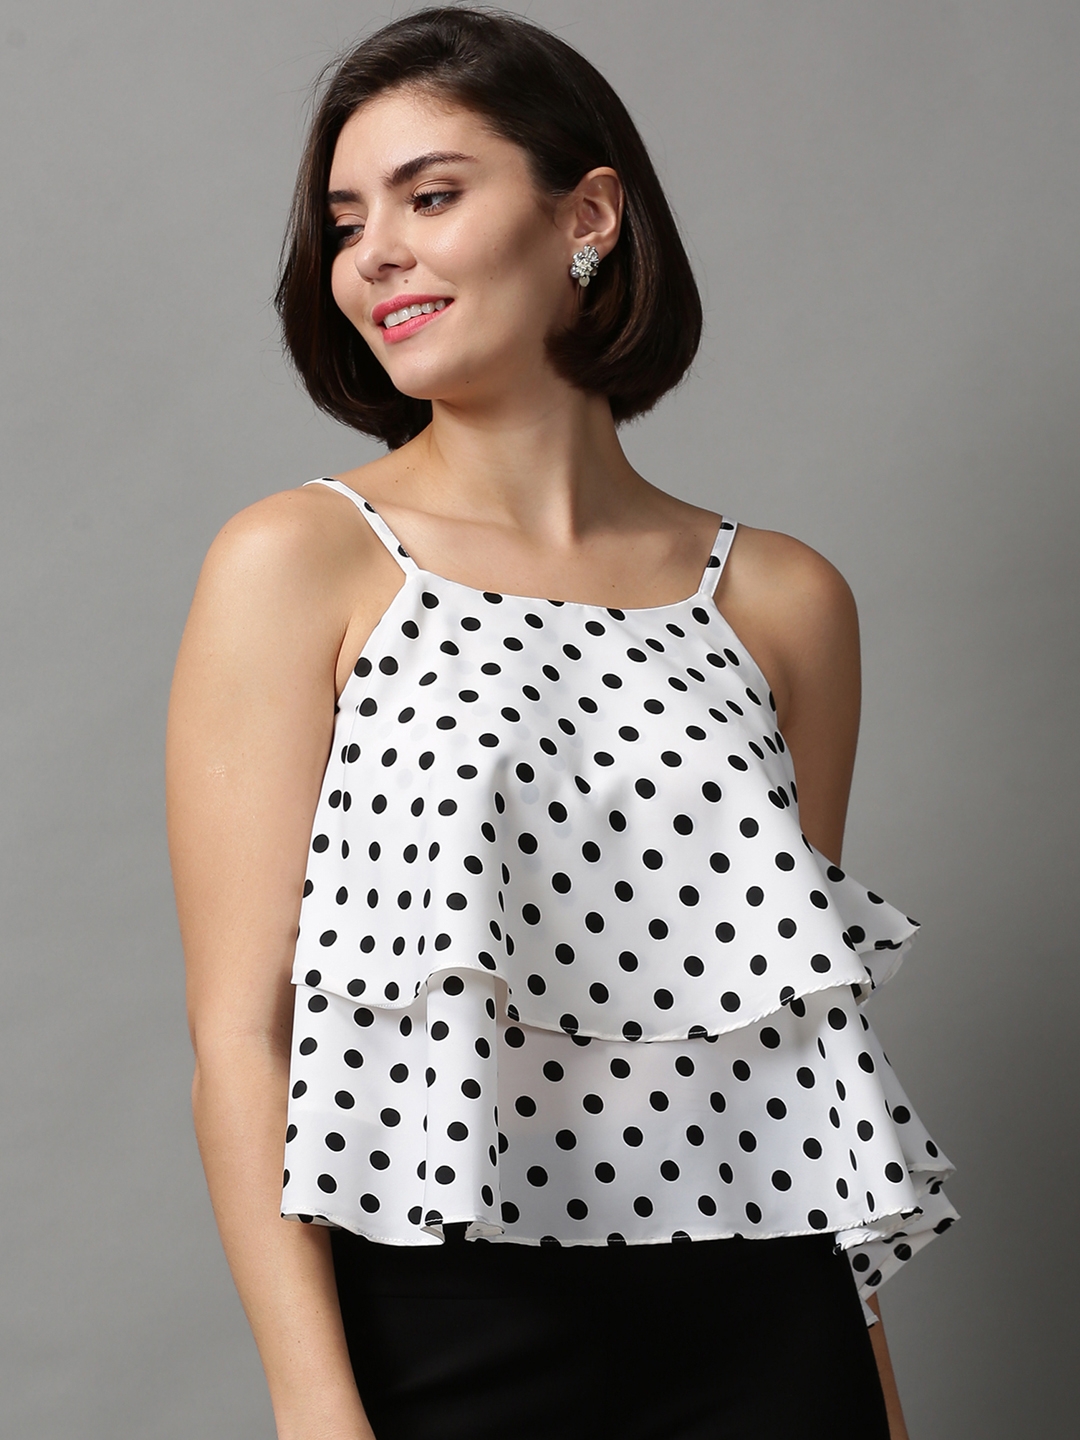 Women's White Polyester Printed Tops